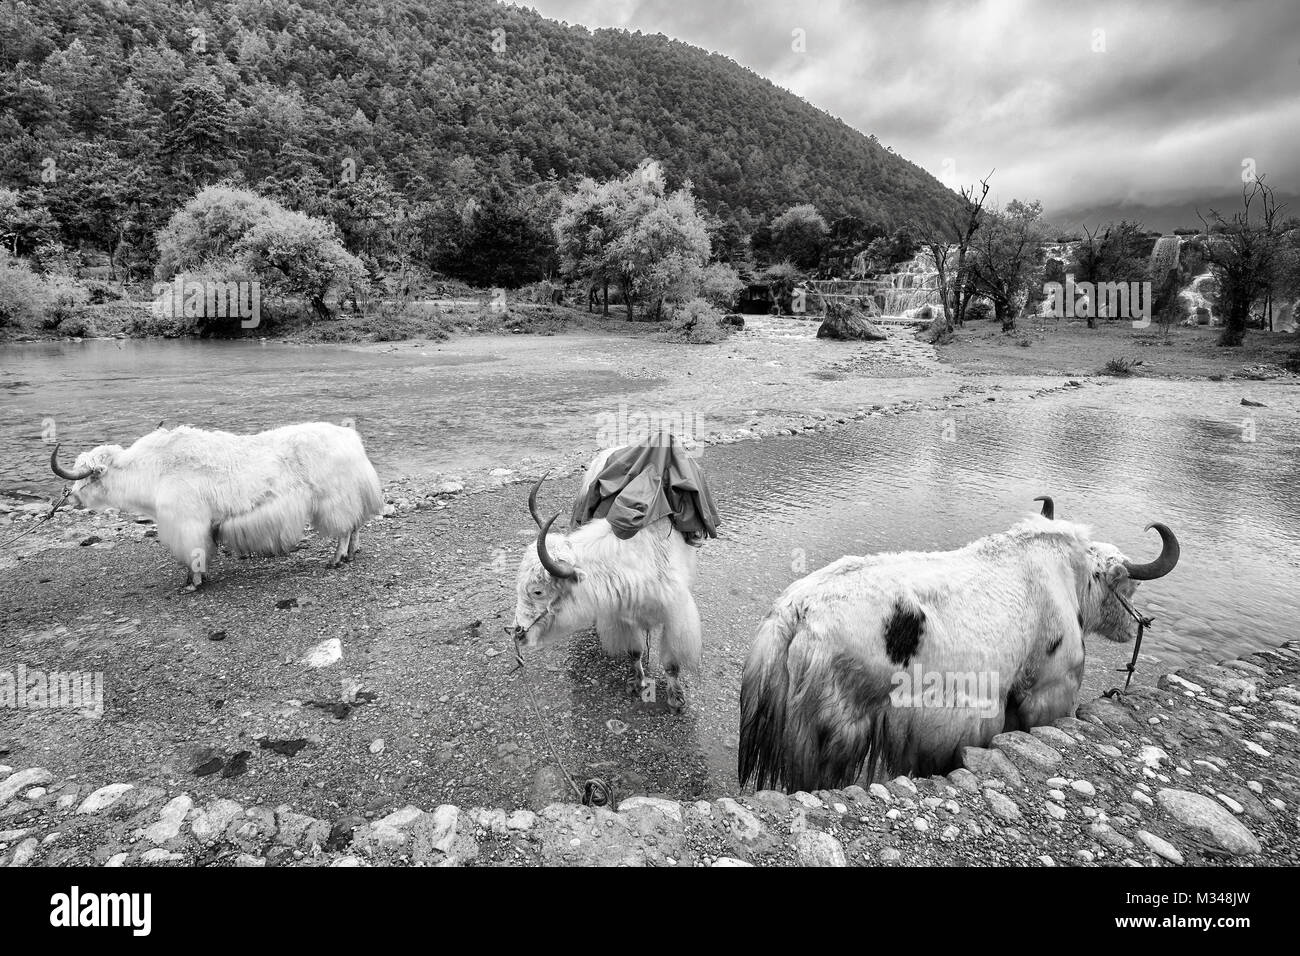 Yaks at the White Water River bank in the Blue Moon Valley, one of the China top travel destinations. Stock Photo